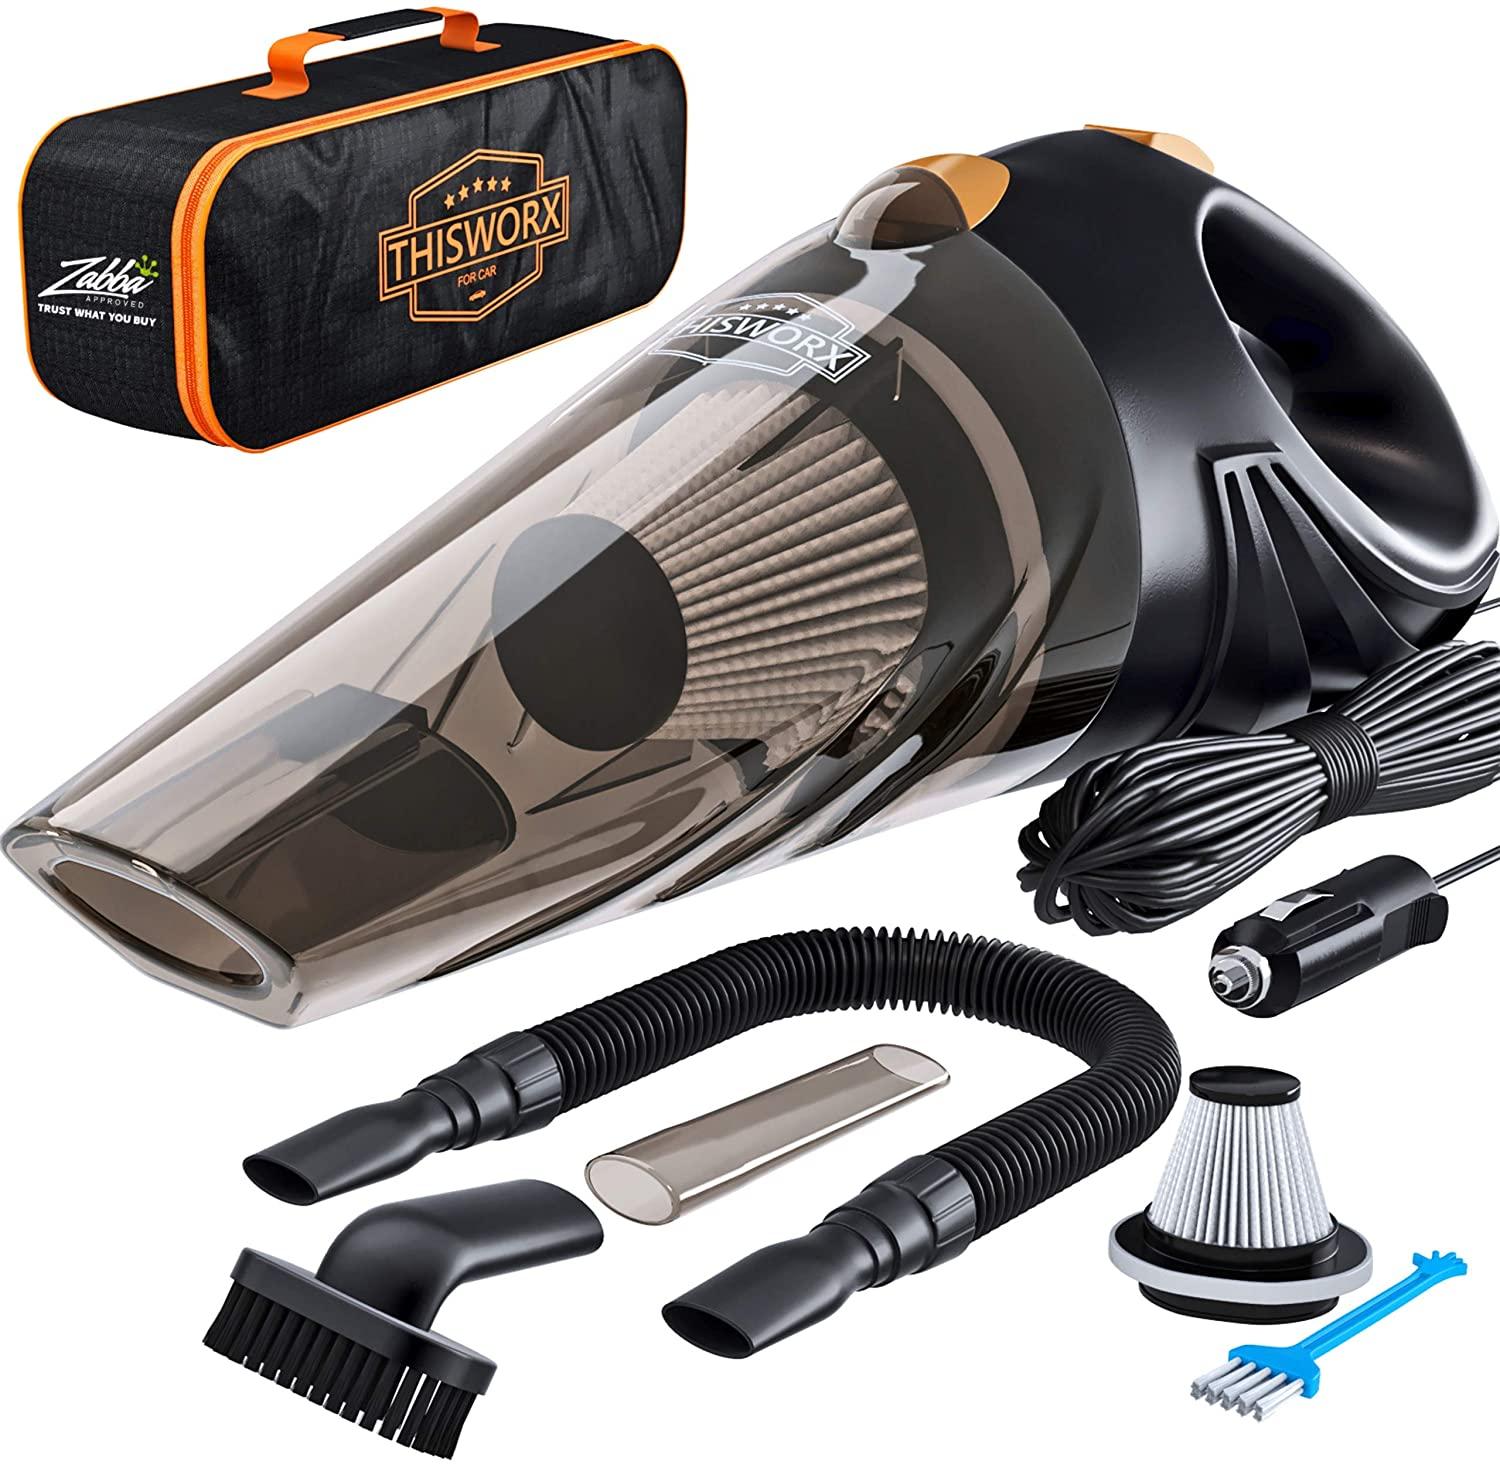 Portable Car Vacuum Cleaner for $27.98 Shipped